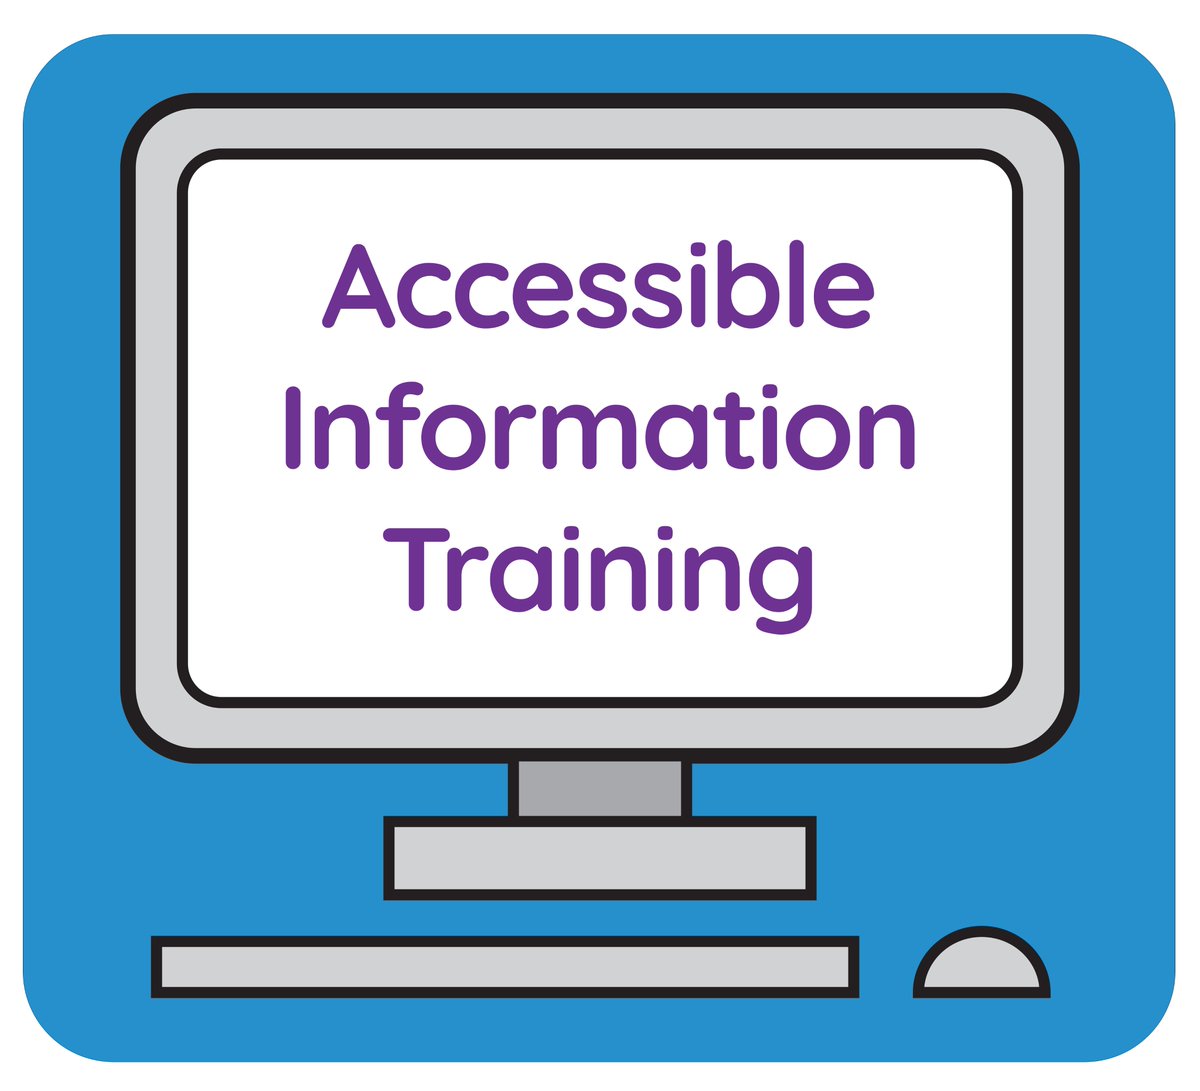 Check out our new training courses and ensure your digital information is accessible for people with disabilities. Online Self-Study Accessibility Awareness course only £9.99 p/p. Instructor led courses only £39 p/p disabilityscot.org.uk/making-informa… #AccessibleInformation